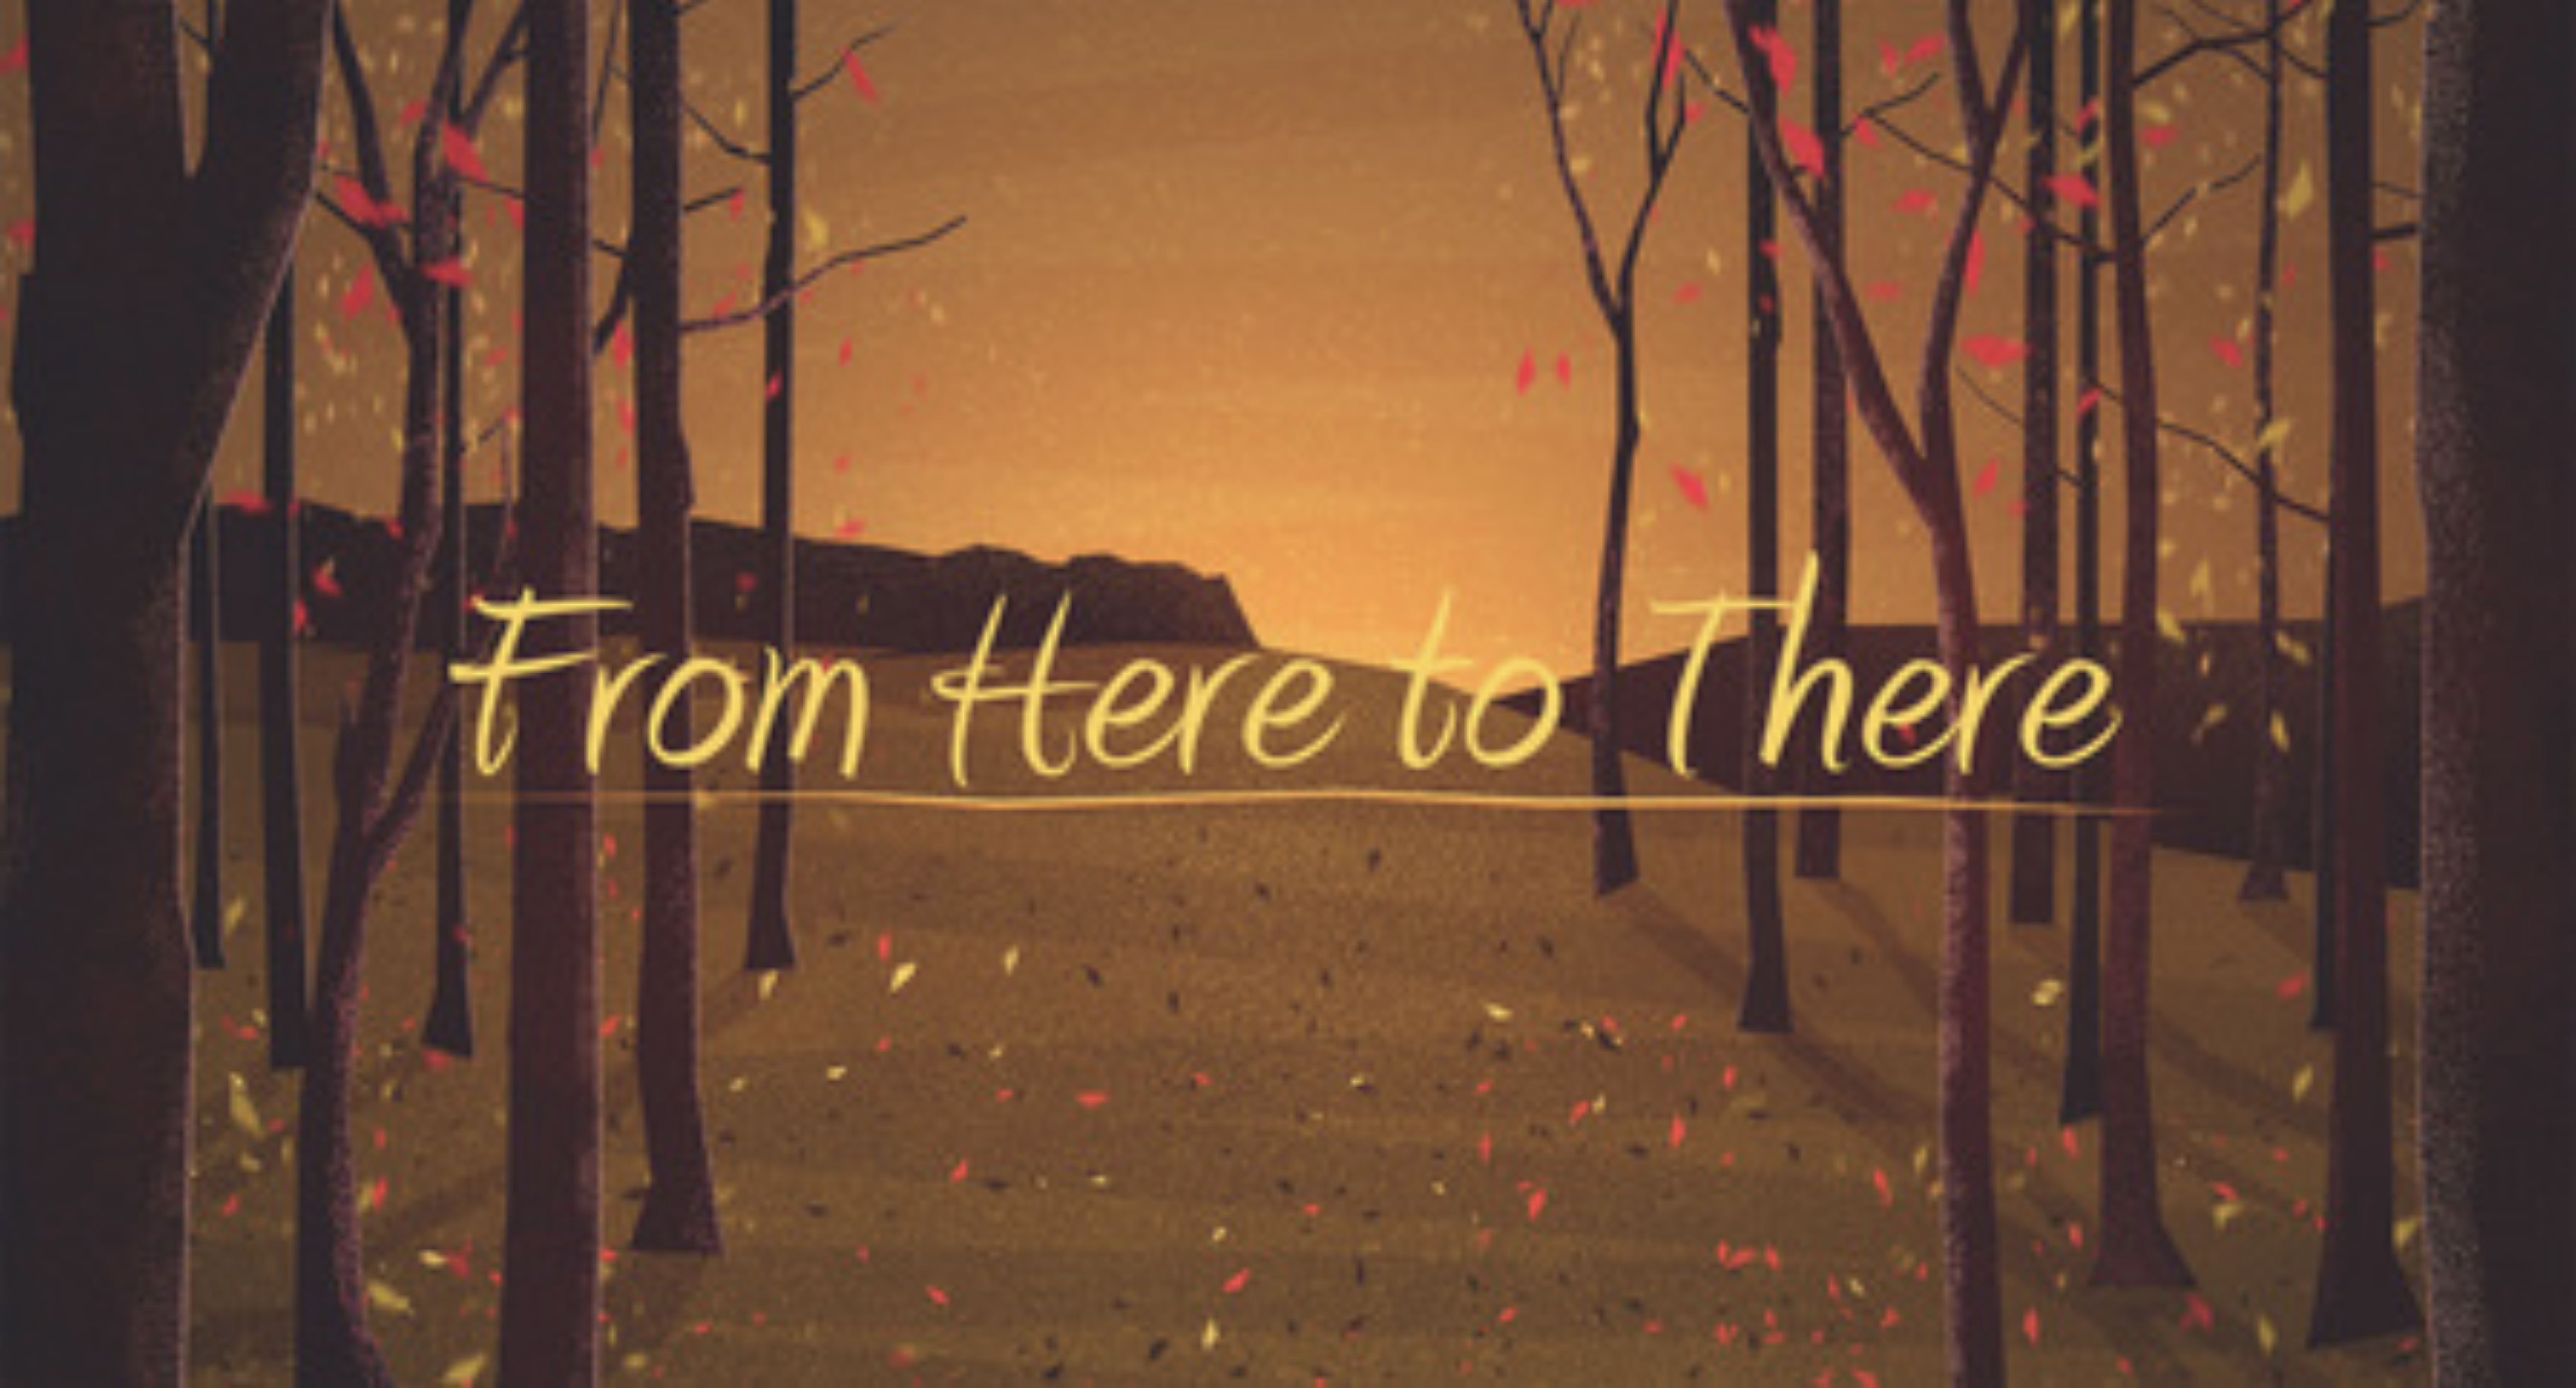 From Here to There Pt. 4